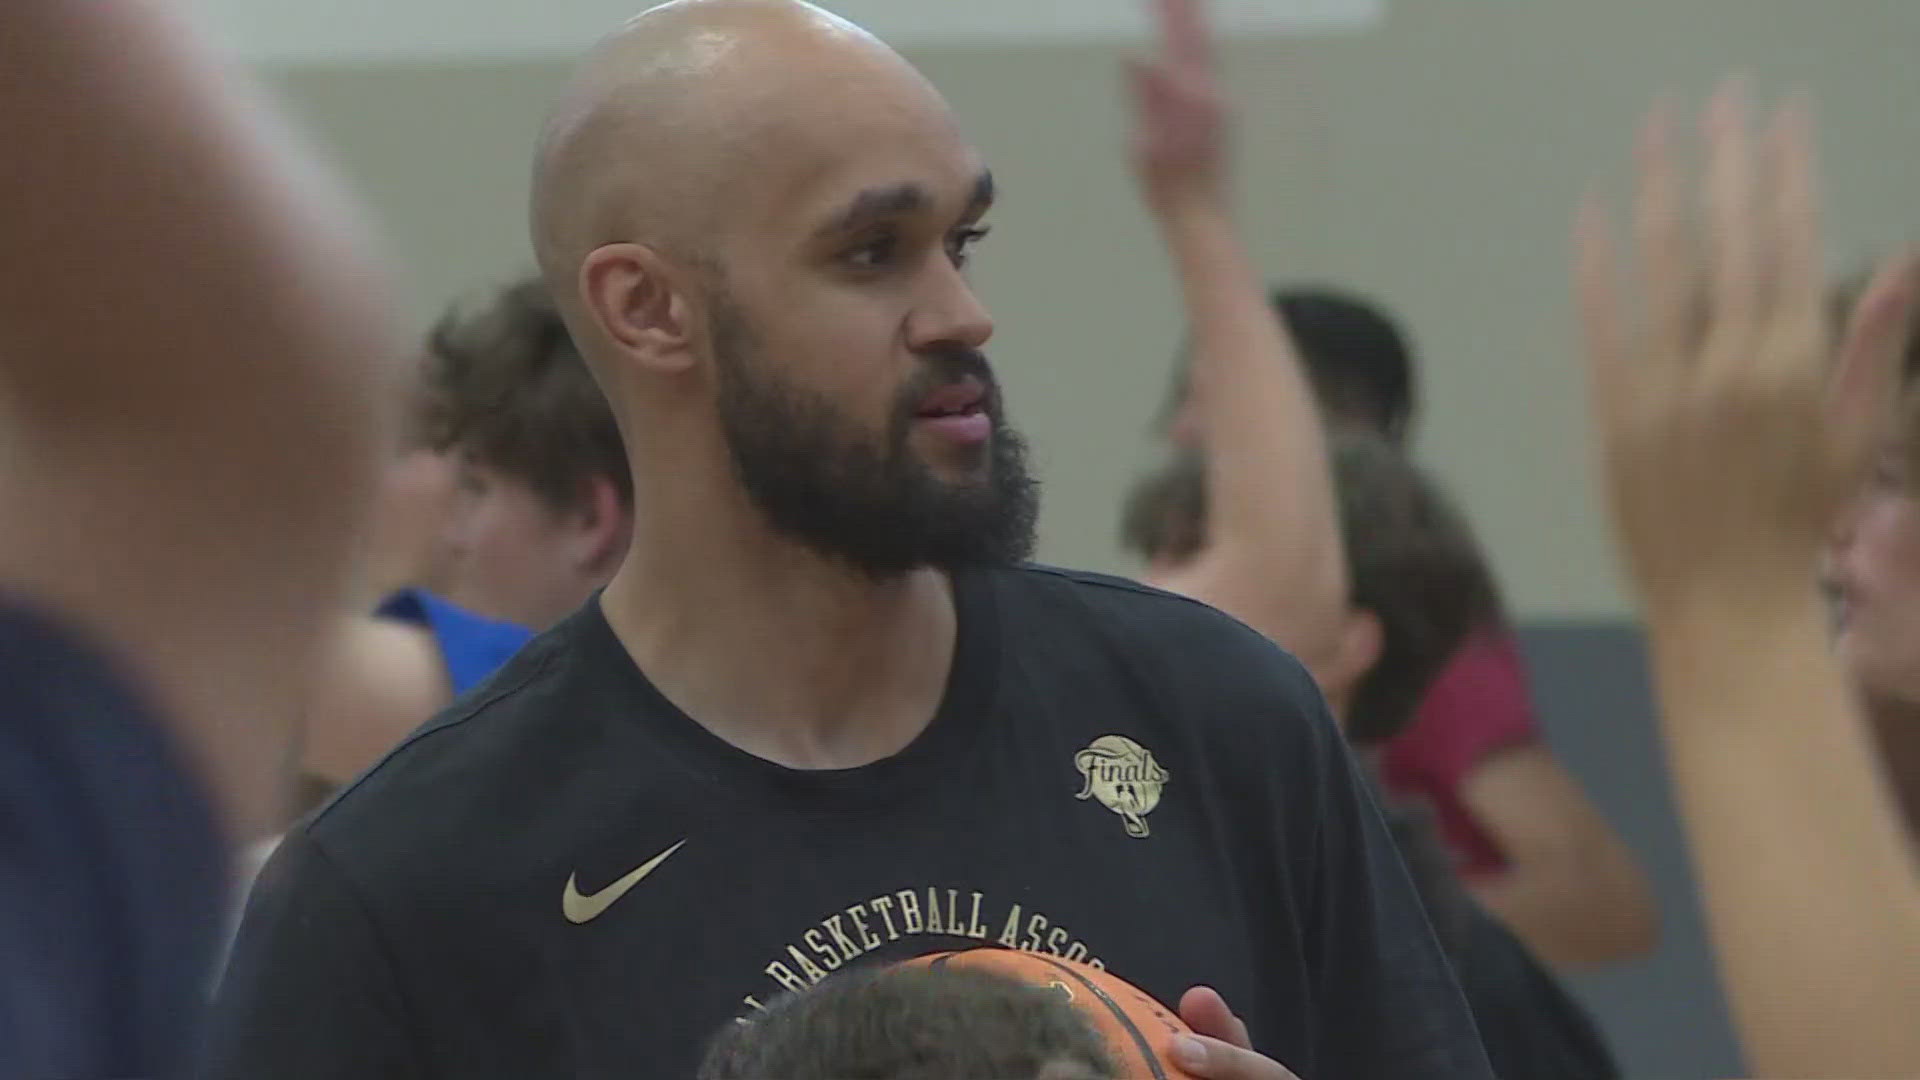 The local hoops star, who just became an NBA Champion, is back in his hometown of Parker giving back to young kids.